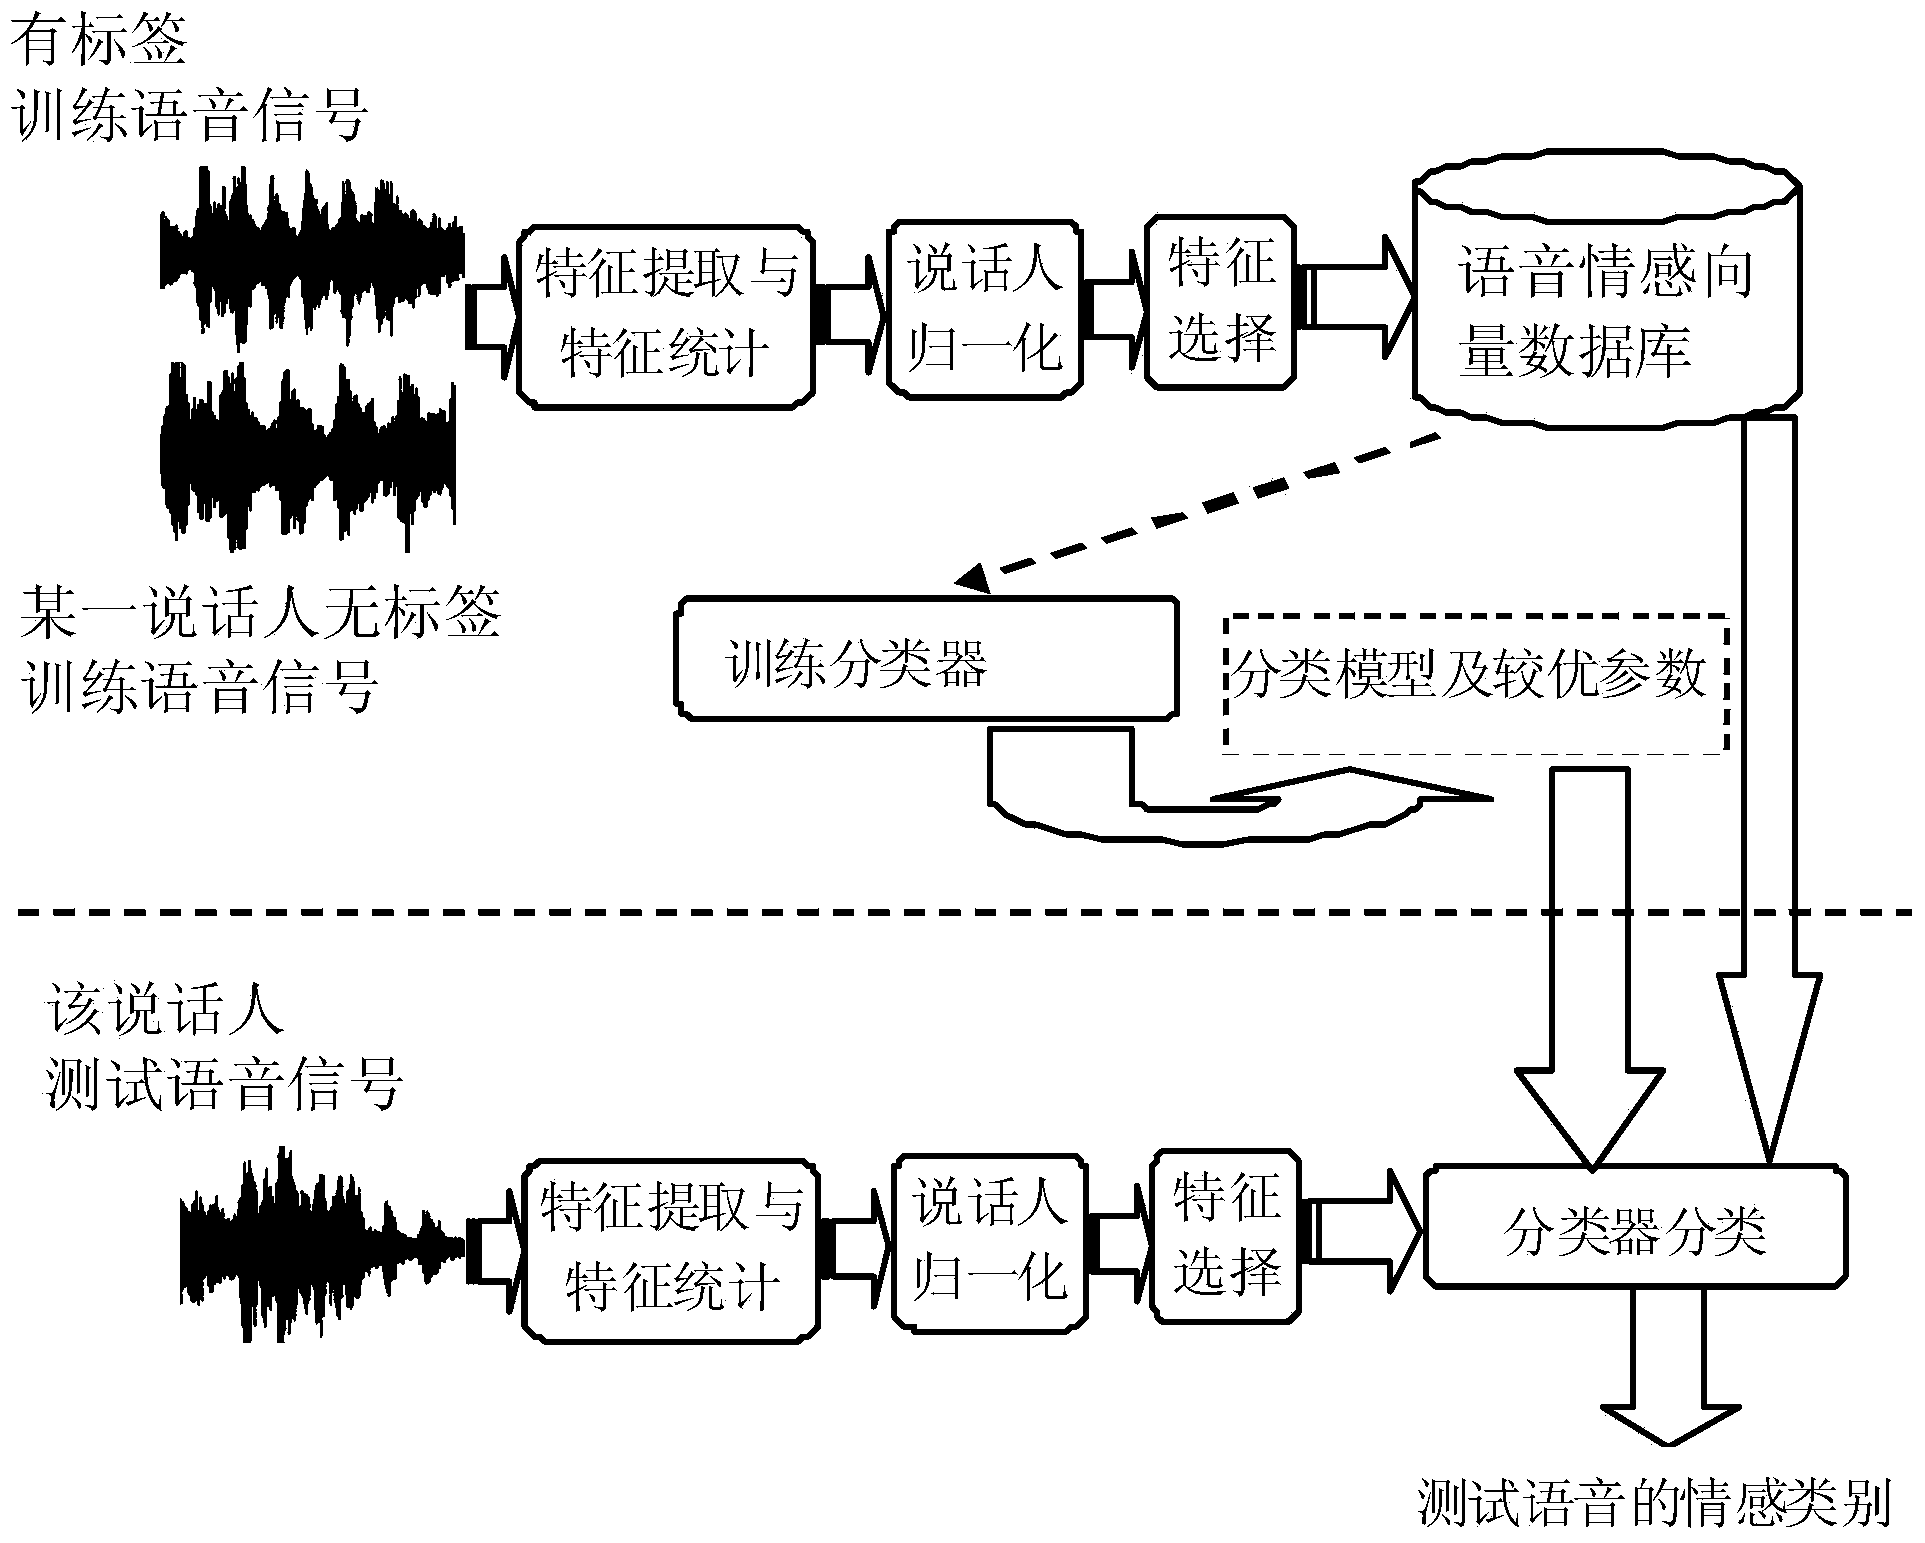 Speech emotion recognition method based on semi-supervised feature selection